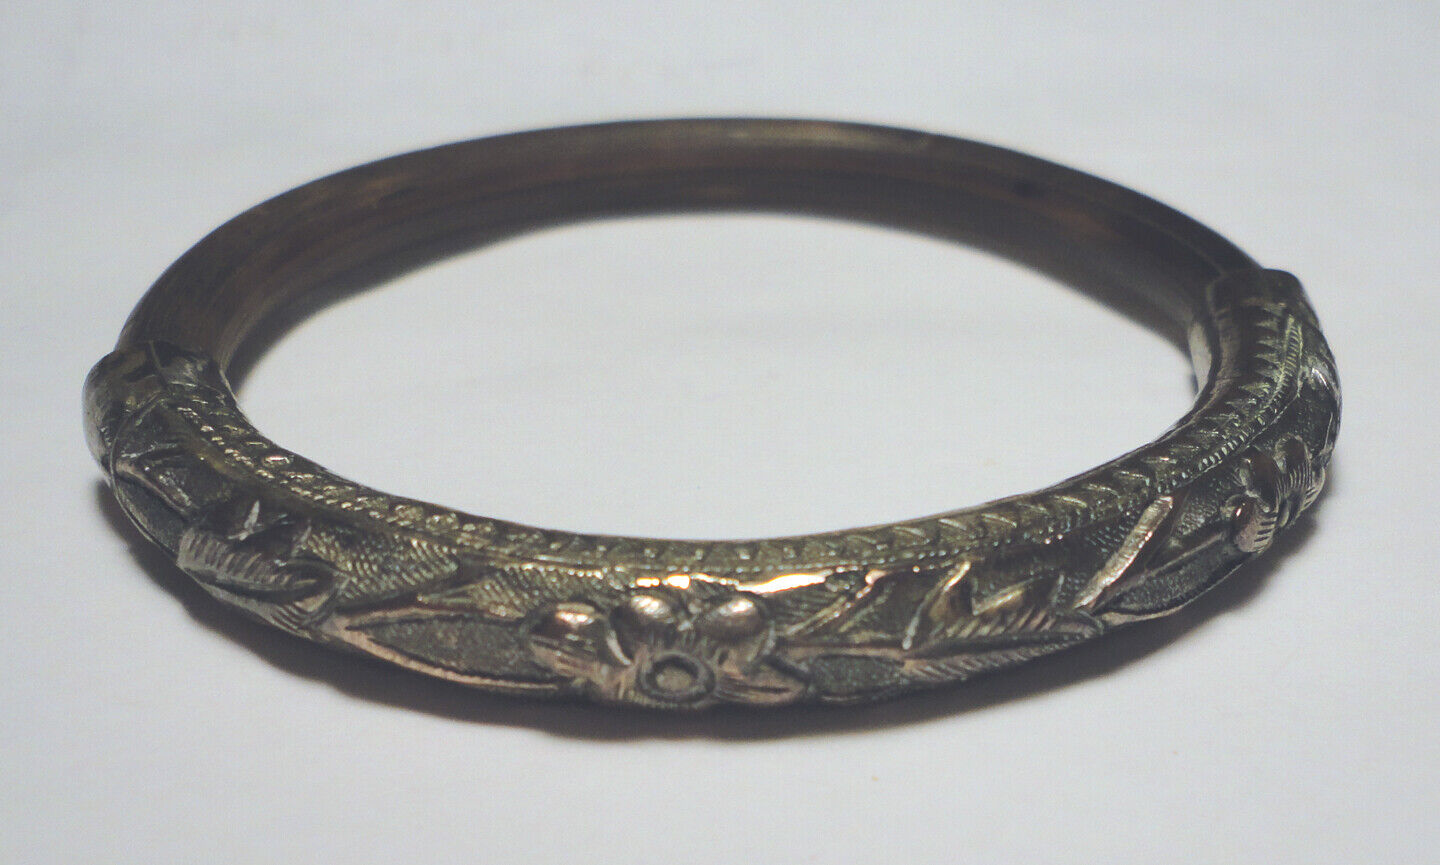 ANTIQUE Chinese BAMBOO Silver Plated REPOUSSE BANGLE BRACELET Flowers/Leaves Popularna, najnowsza praca